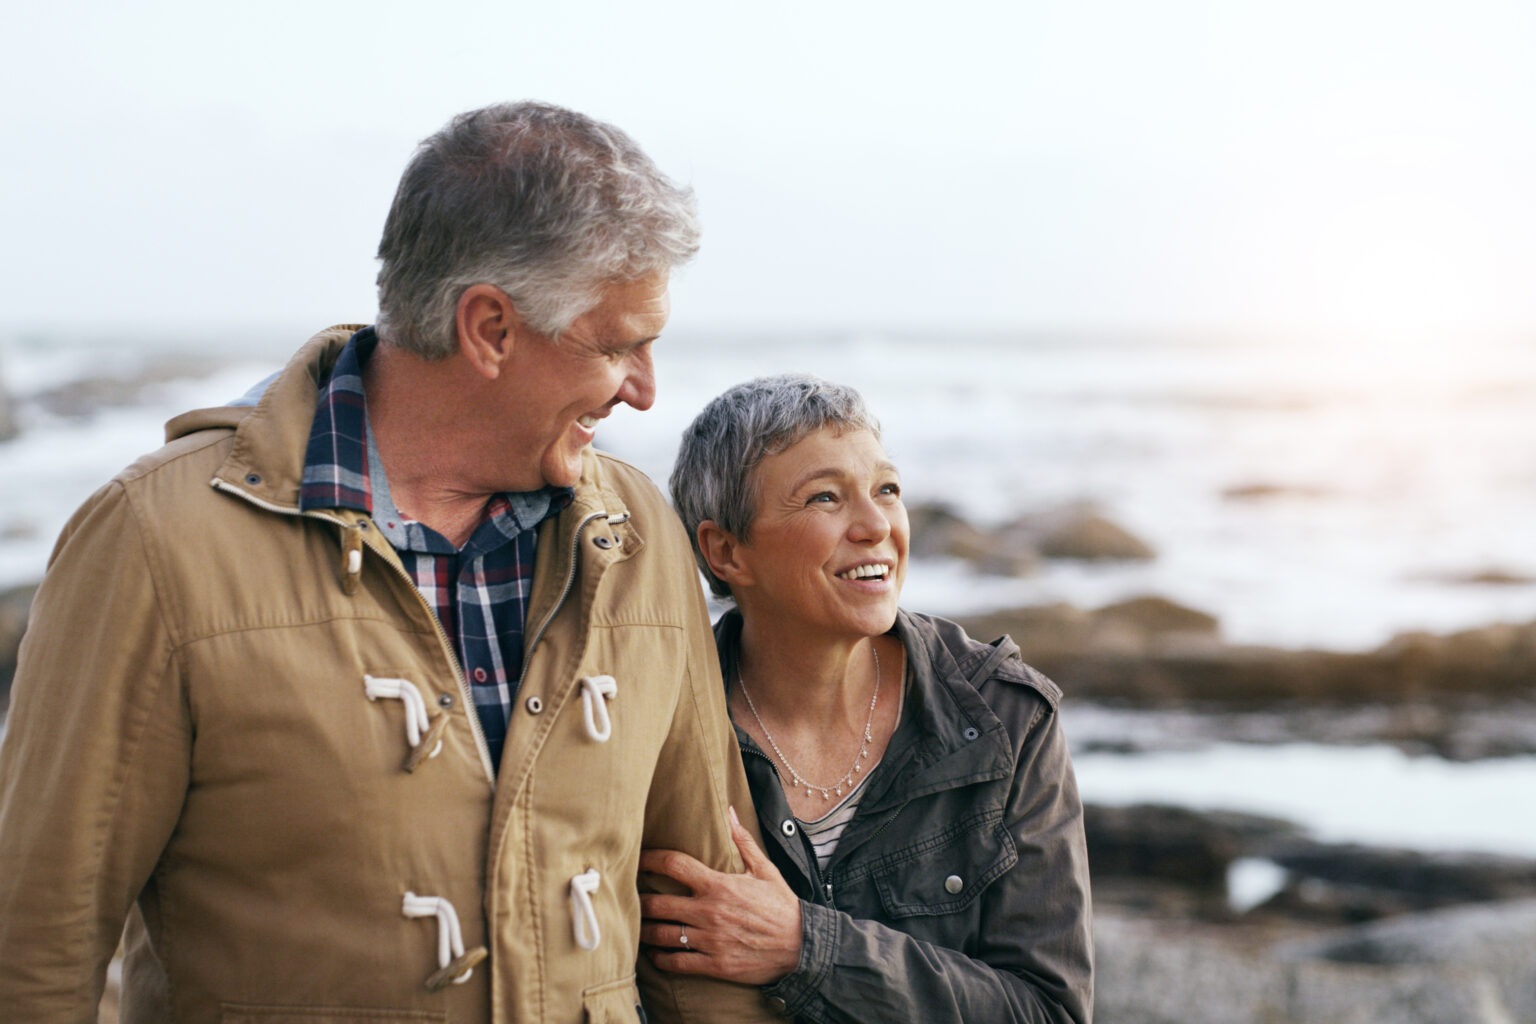 Explore all the free retirement planning resources AgingOptions has to offer.